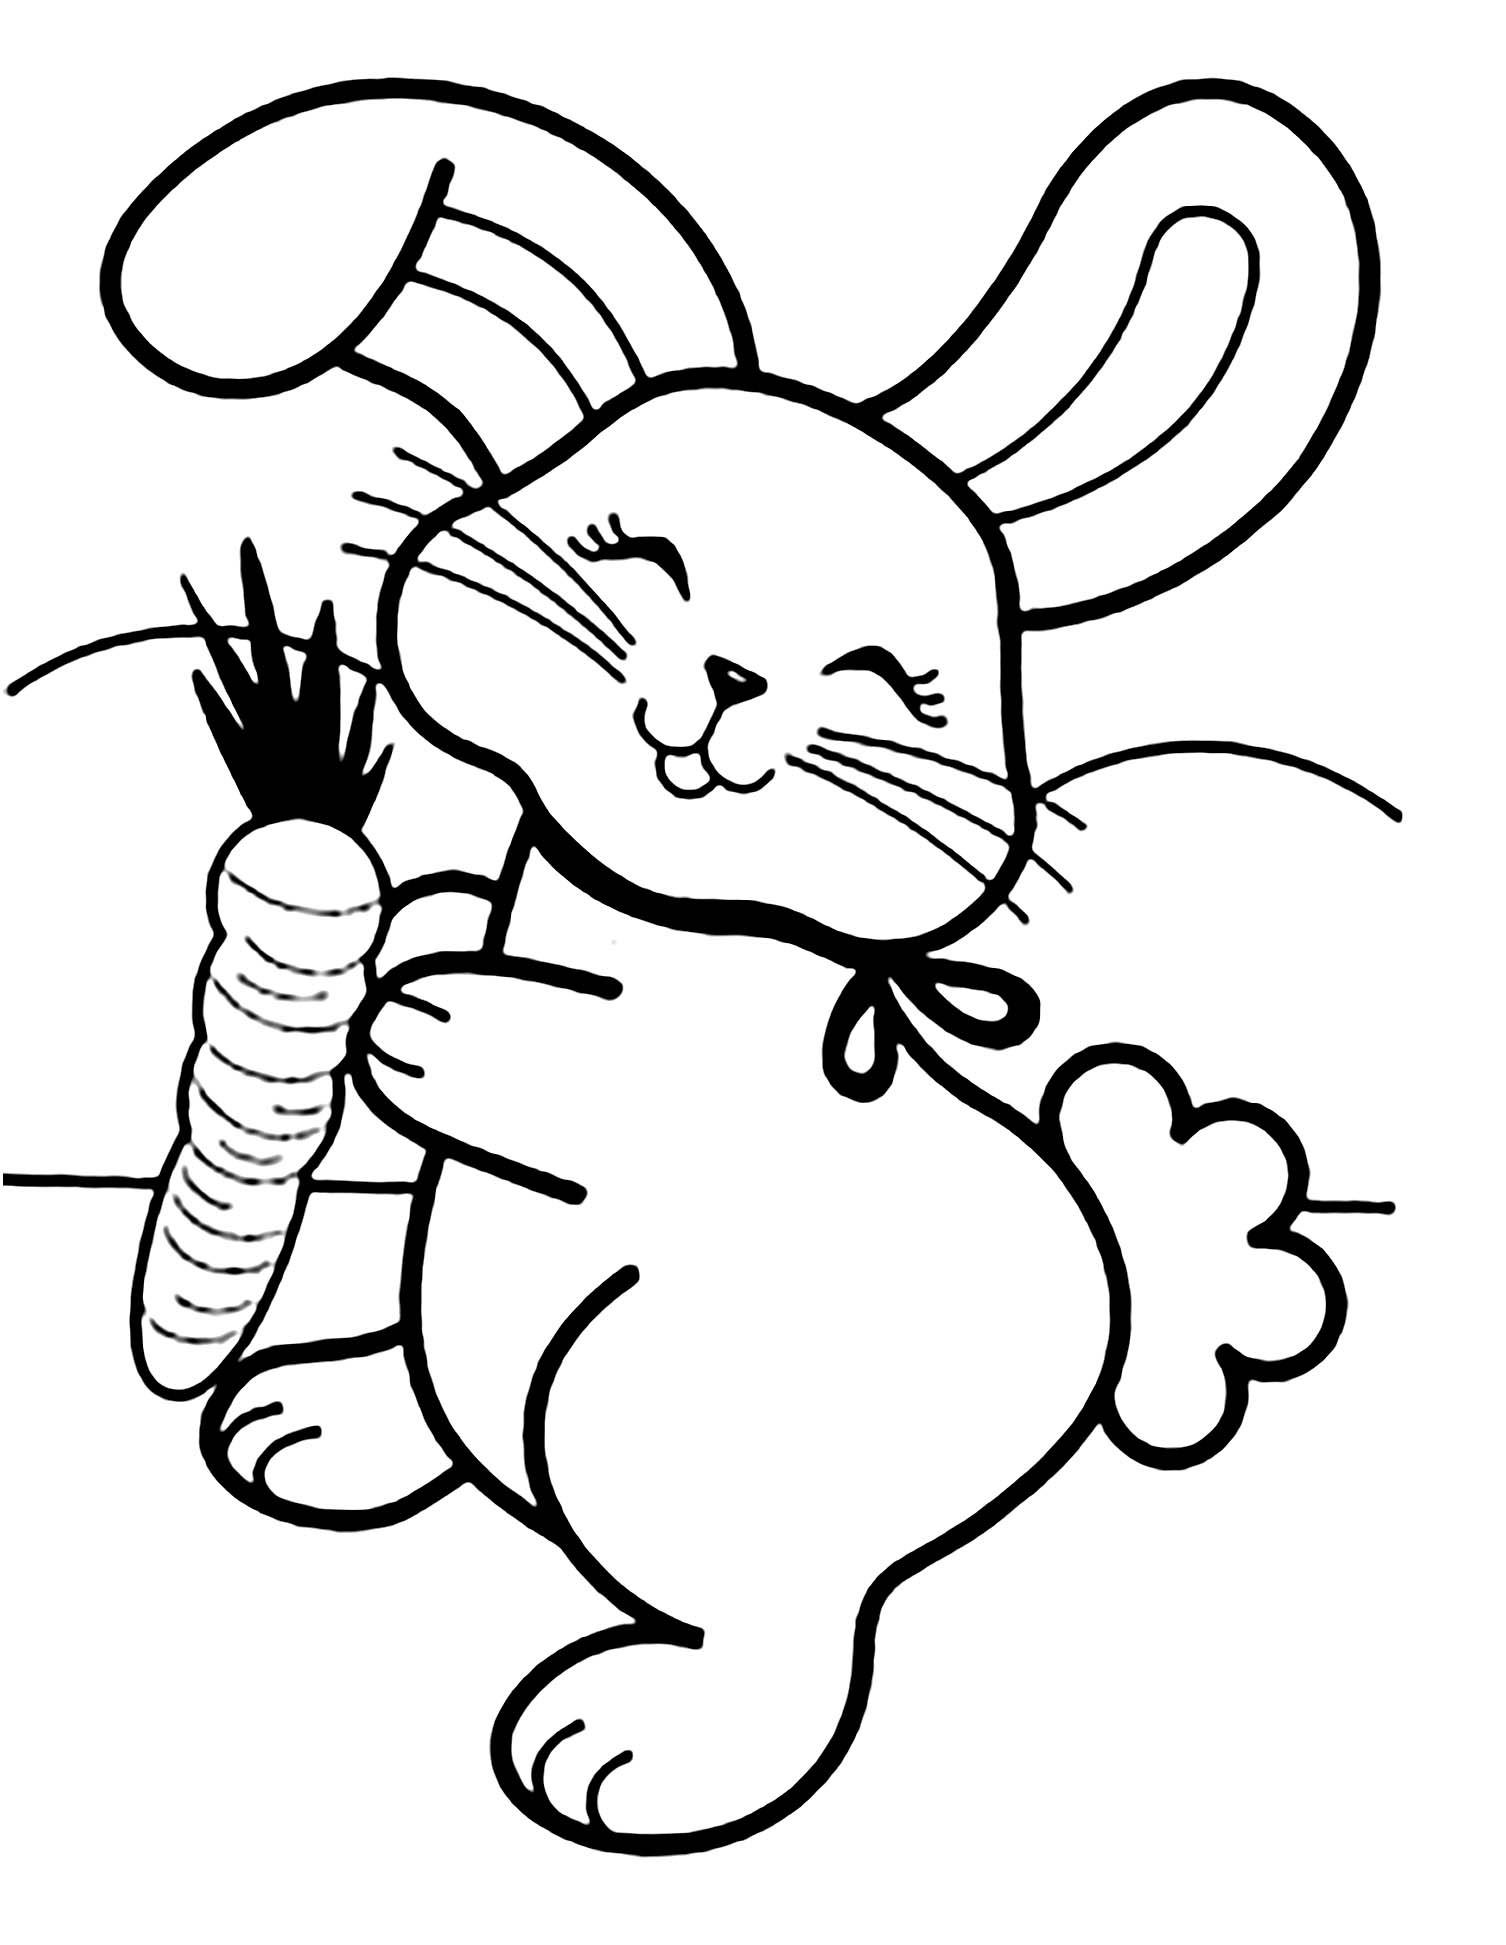 Bunny Coloring Pages For Kids
 Rabbit to color for kids Rabbit Kids Coloring Pages